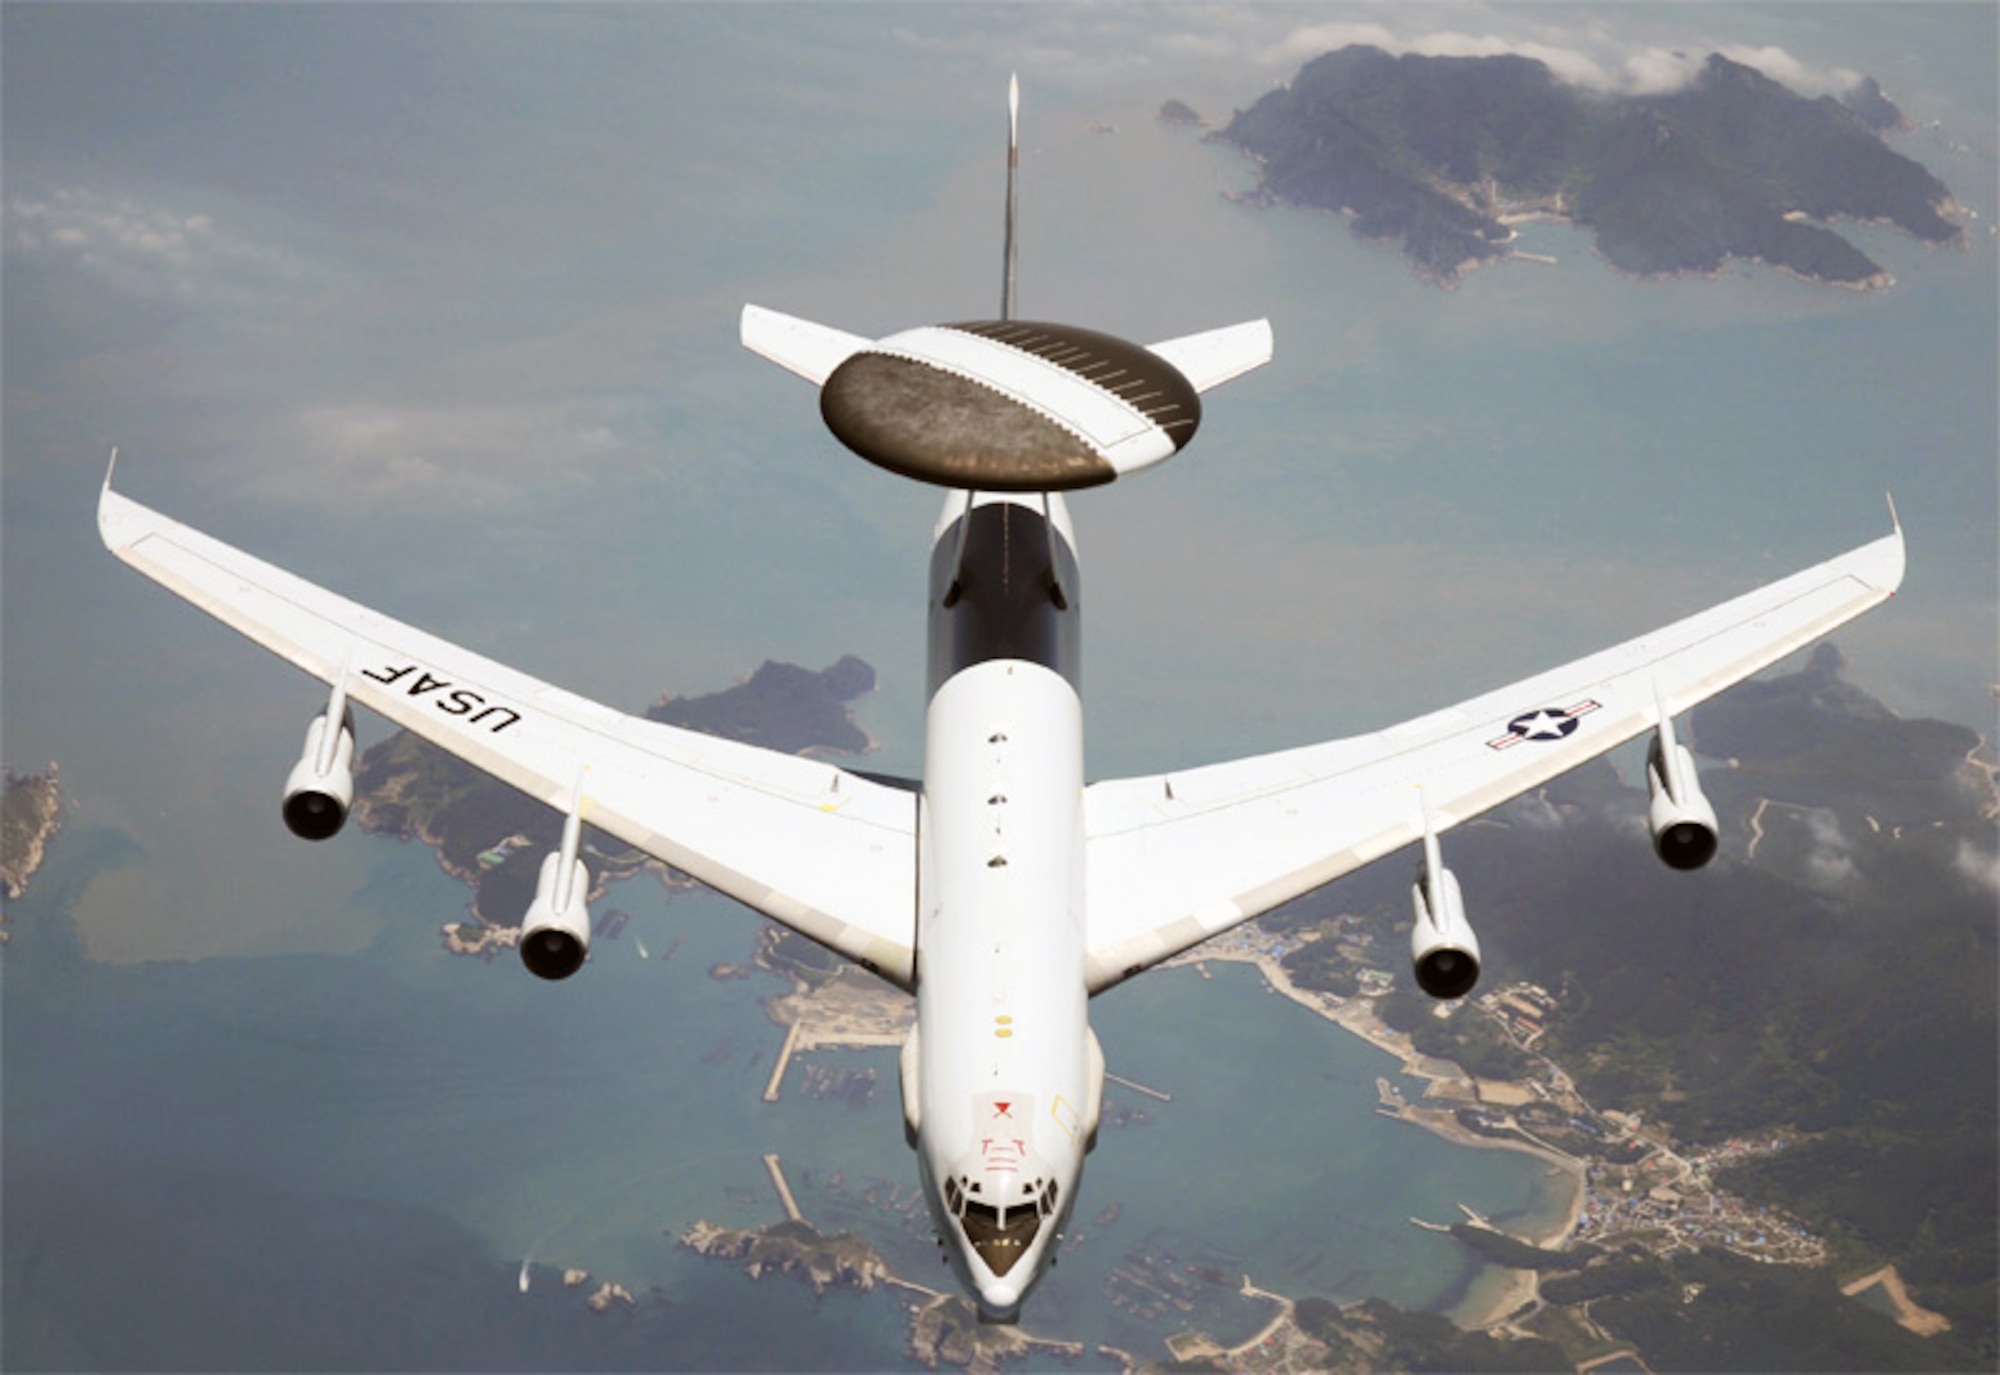 An E-3G Sentry (AWACS) patrols the skies over the U.S. on a recent homeland defense mission. The long-awaited, highly anticipated deployment of the E-3 Block 40/45 is finally over, with the deployment of the first upgraded weapon system to a combat theater of operations. (U.S. Air Force photo)